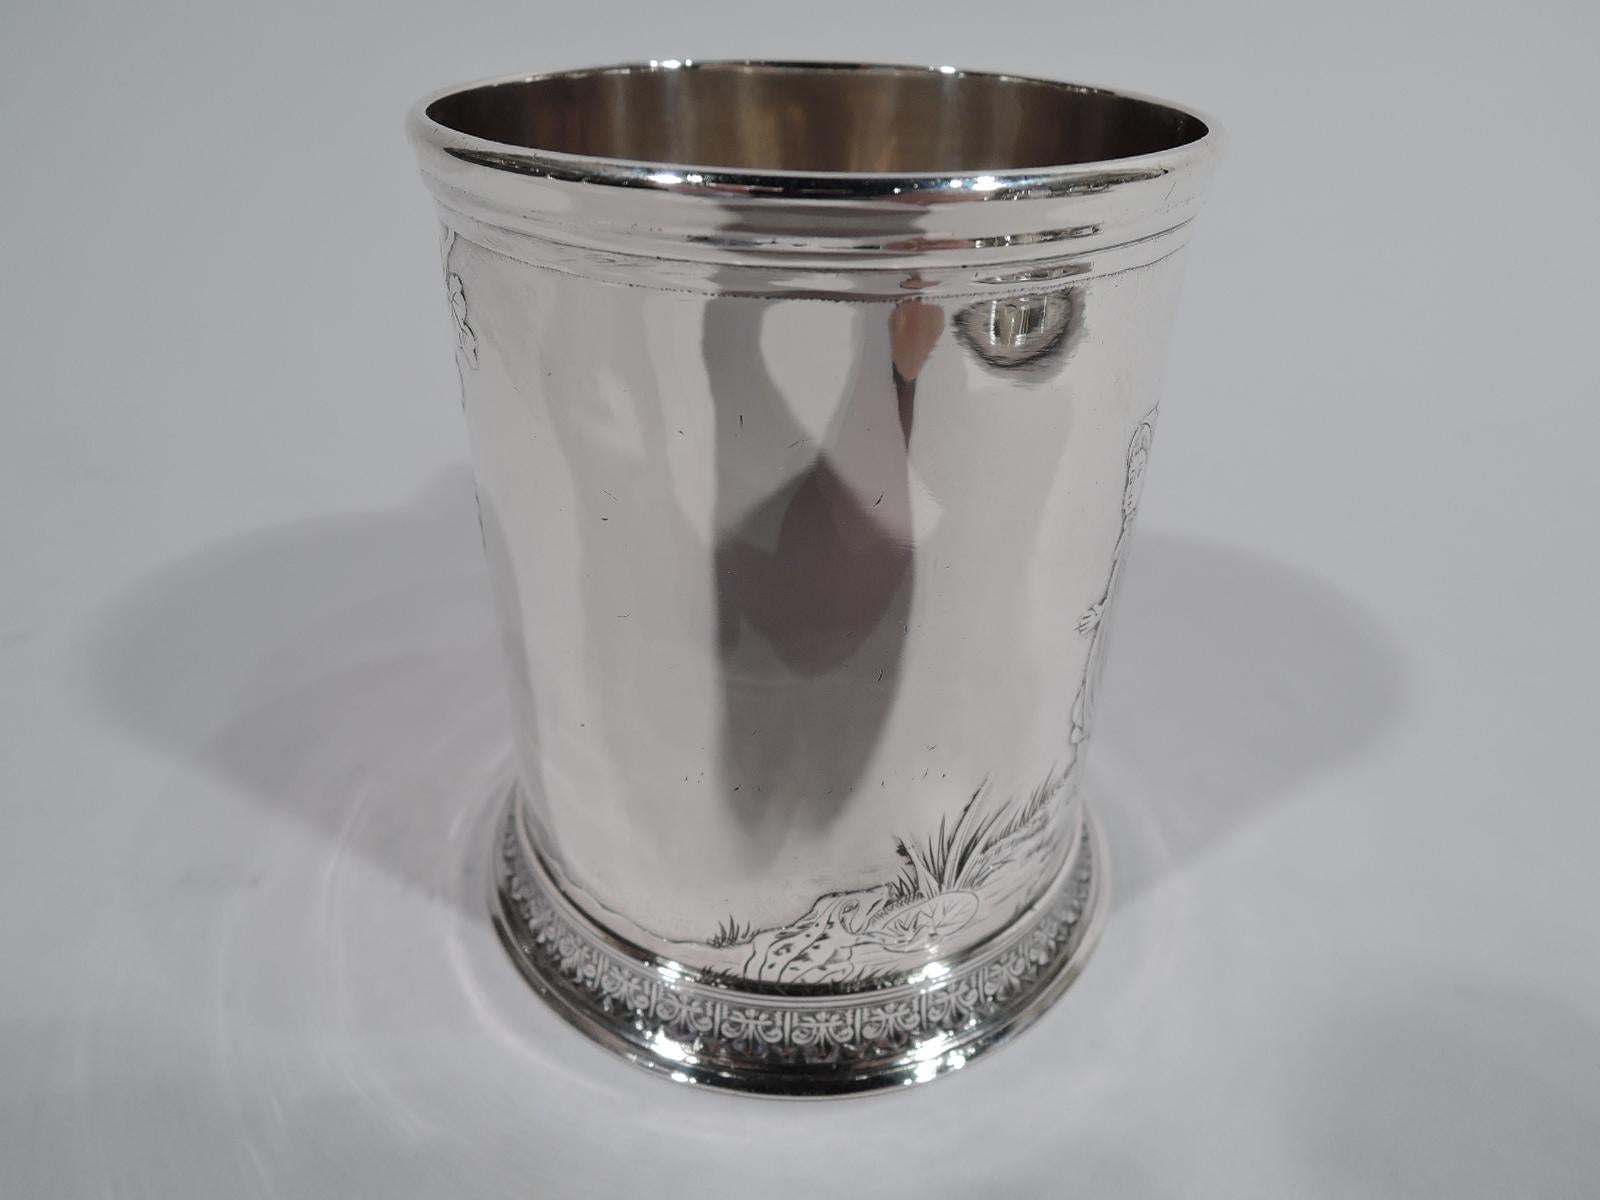 Turn-of-the-century Edwardian Art Nouveau sterling silver baby cup. Made by Whiting in New York. Straight sides with molded rim and c-scroll handle. Foot skirted with low-relief leaf-and-dart border. On front acid-etched figural scene with bonneted